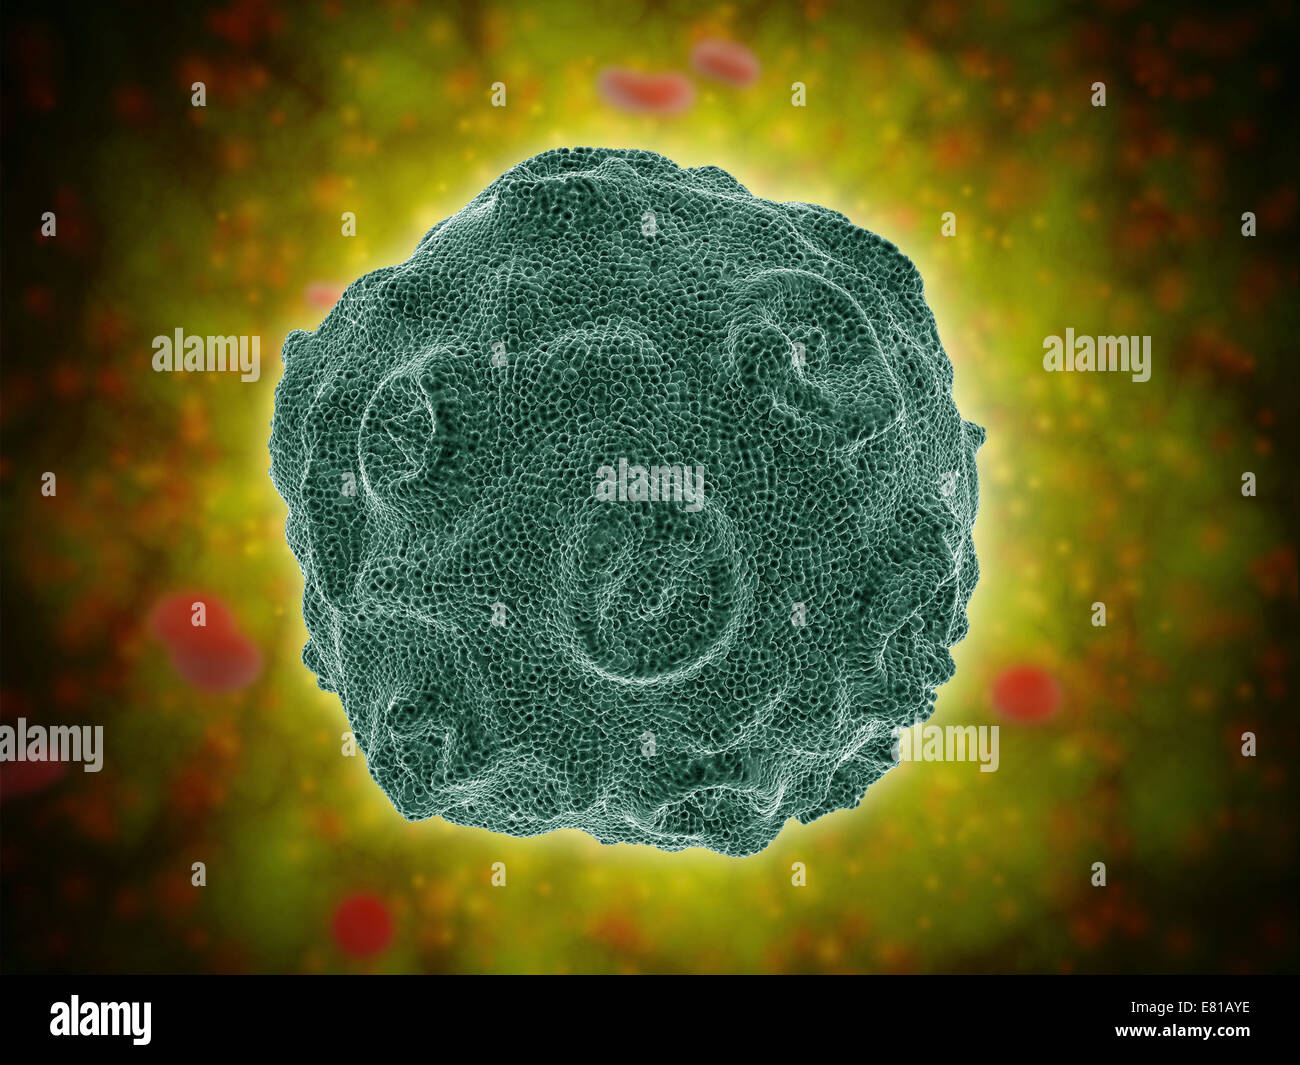 Conceptual image of the Human Papilloma Virus (HPV). HPV is a virus from the papillomavirus family that affects human skin and t Stock Photo